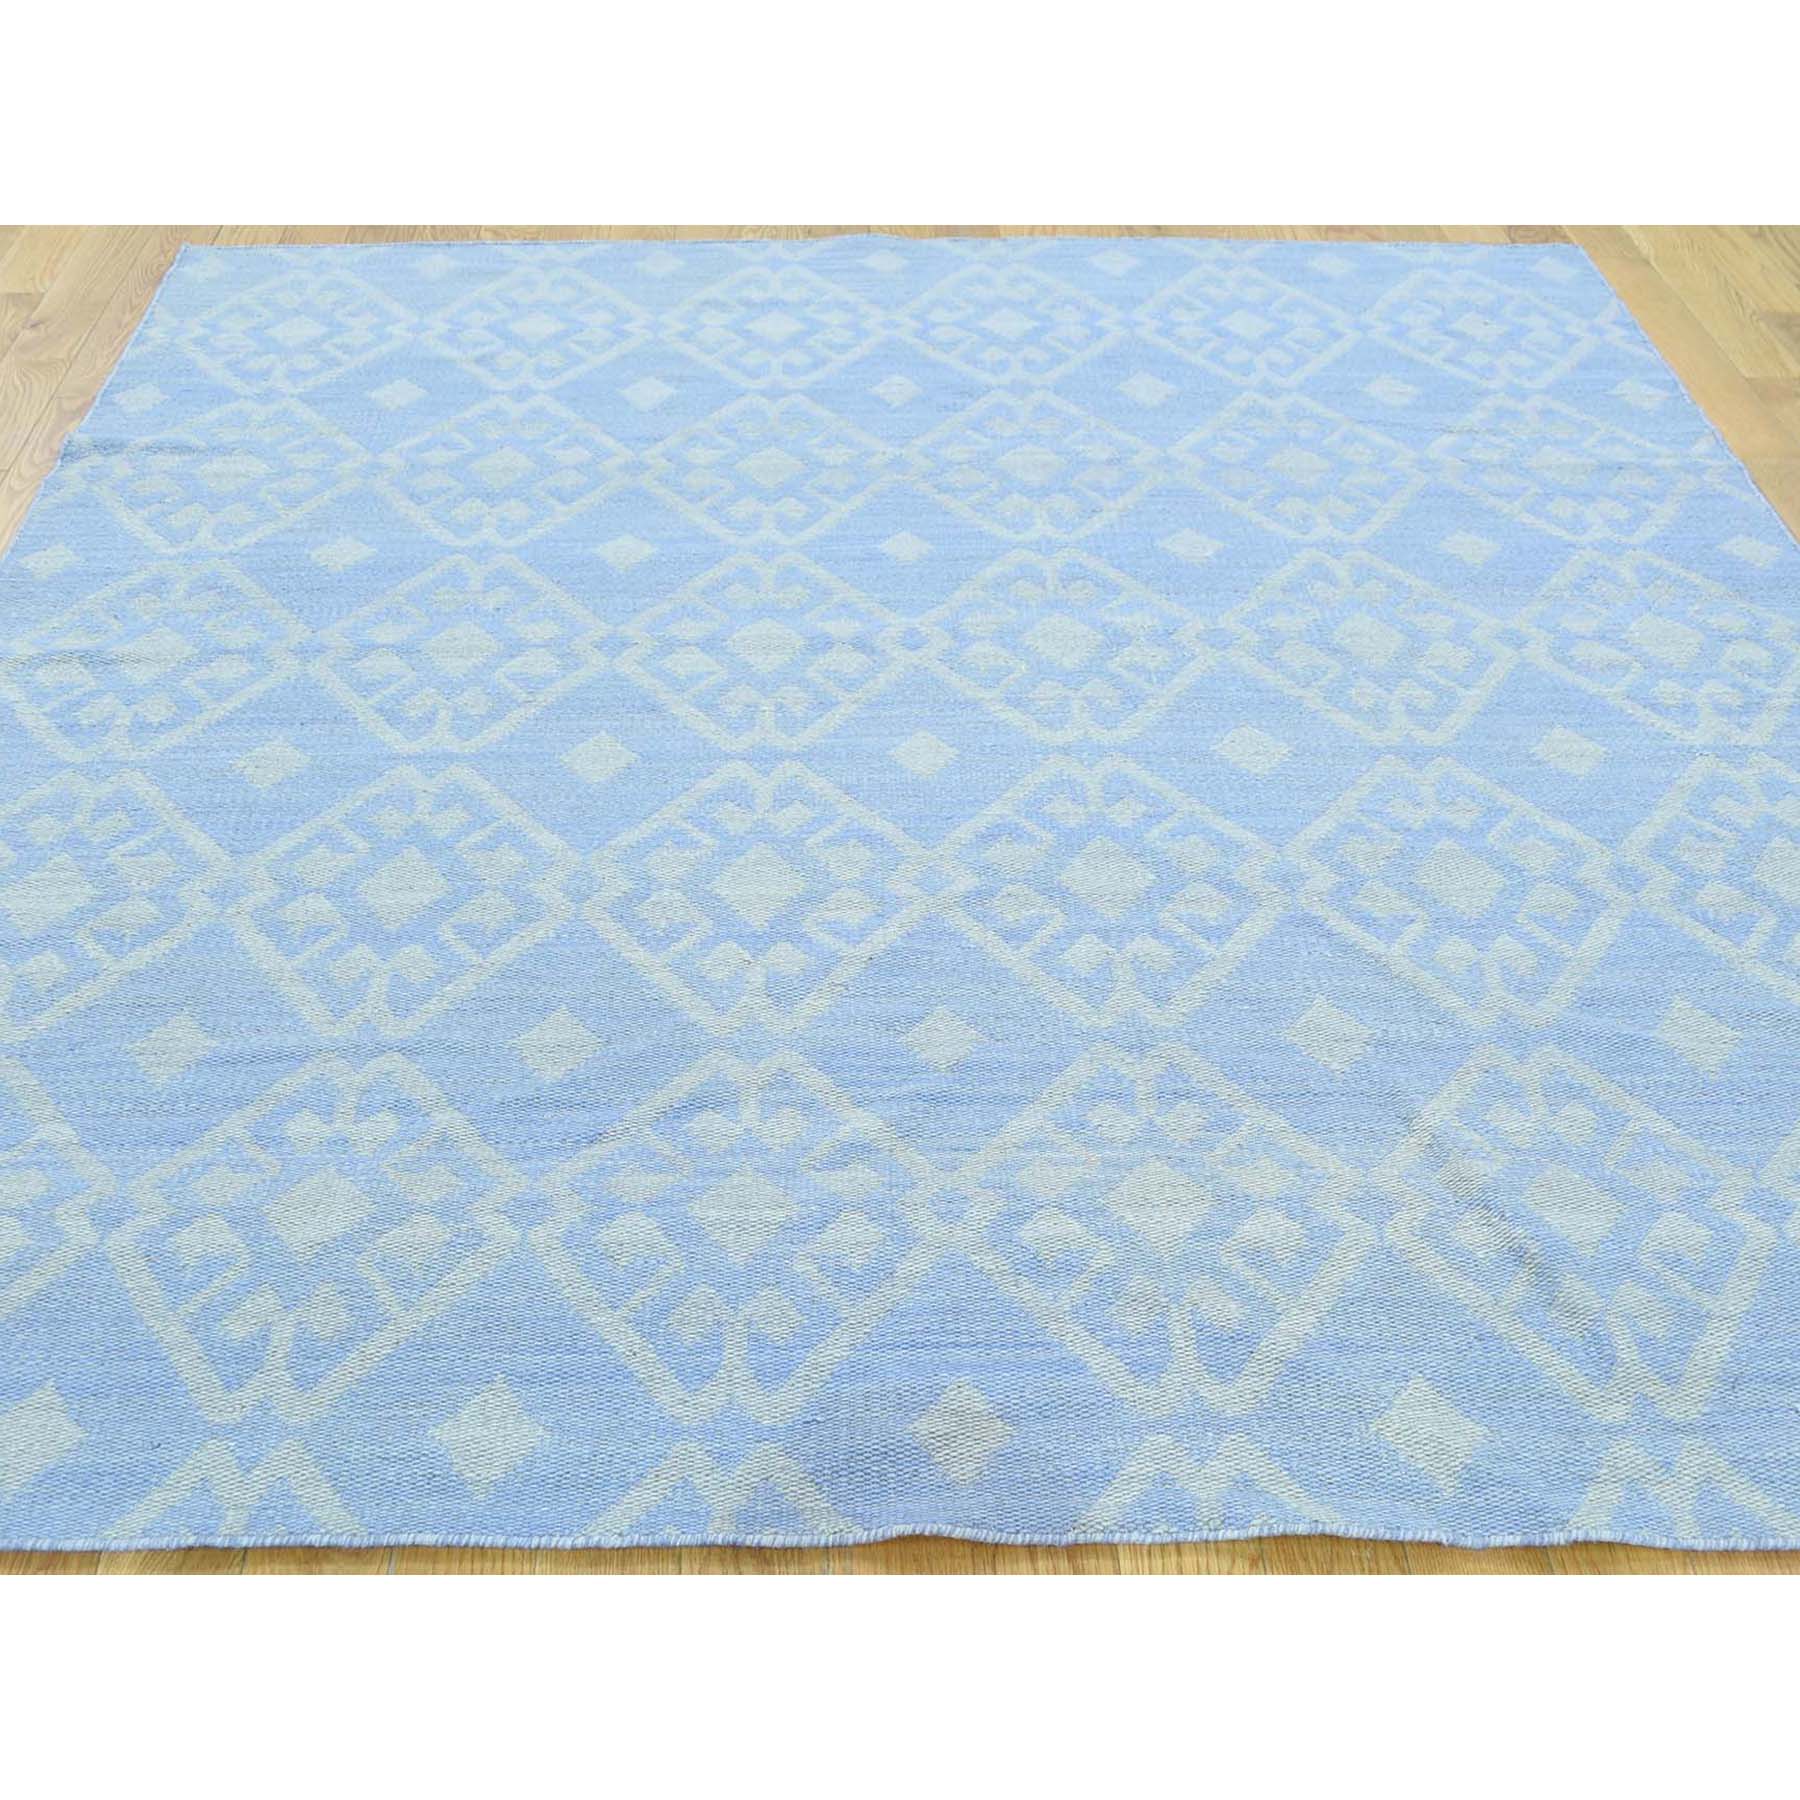 7-10 x7-10  Hand-Woven Flat Weave Reversible Durie Kilim Square Rug 